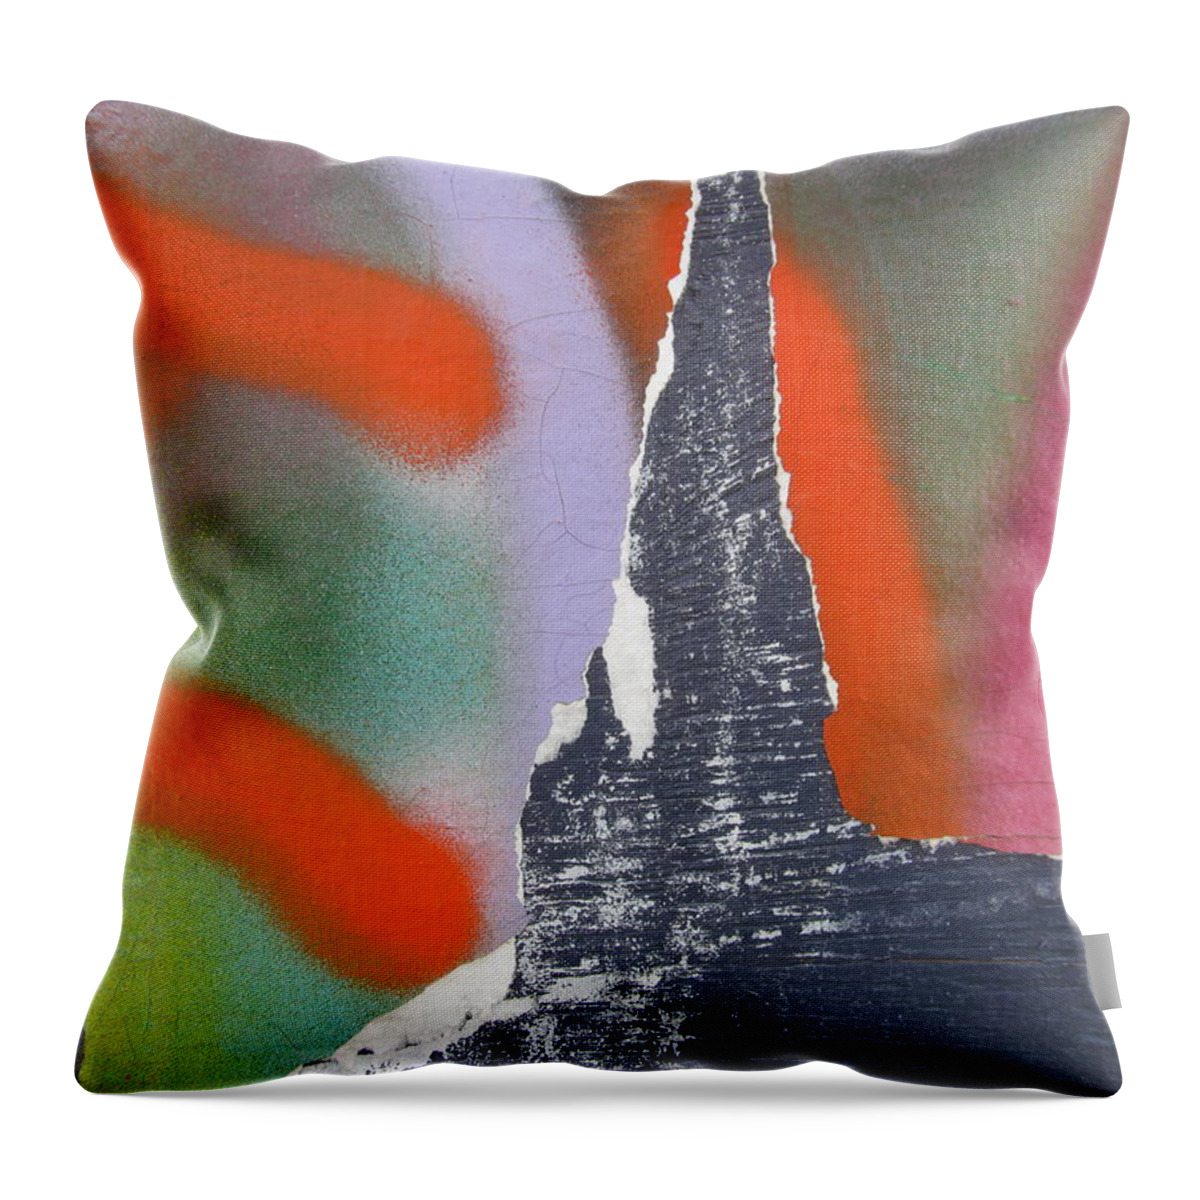 Color On Wall Throw Pillow featuring the photograph Colour On Wall by Alfred Ng